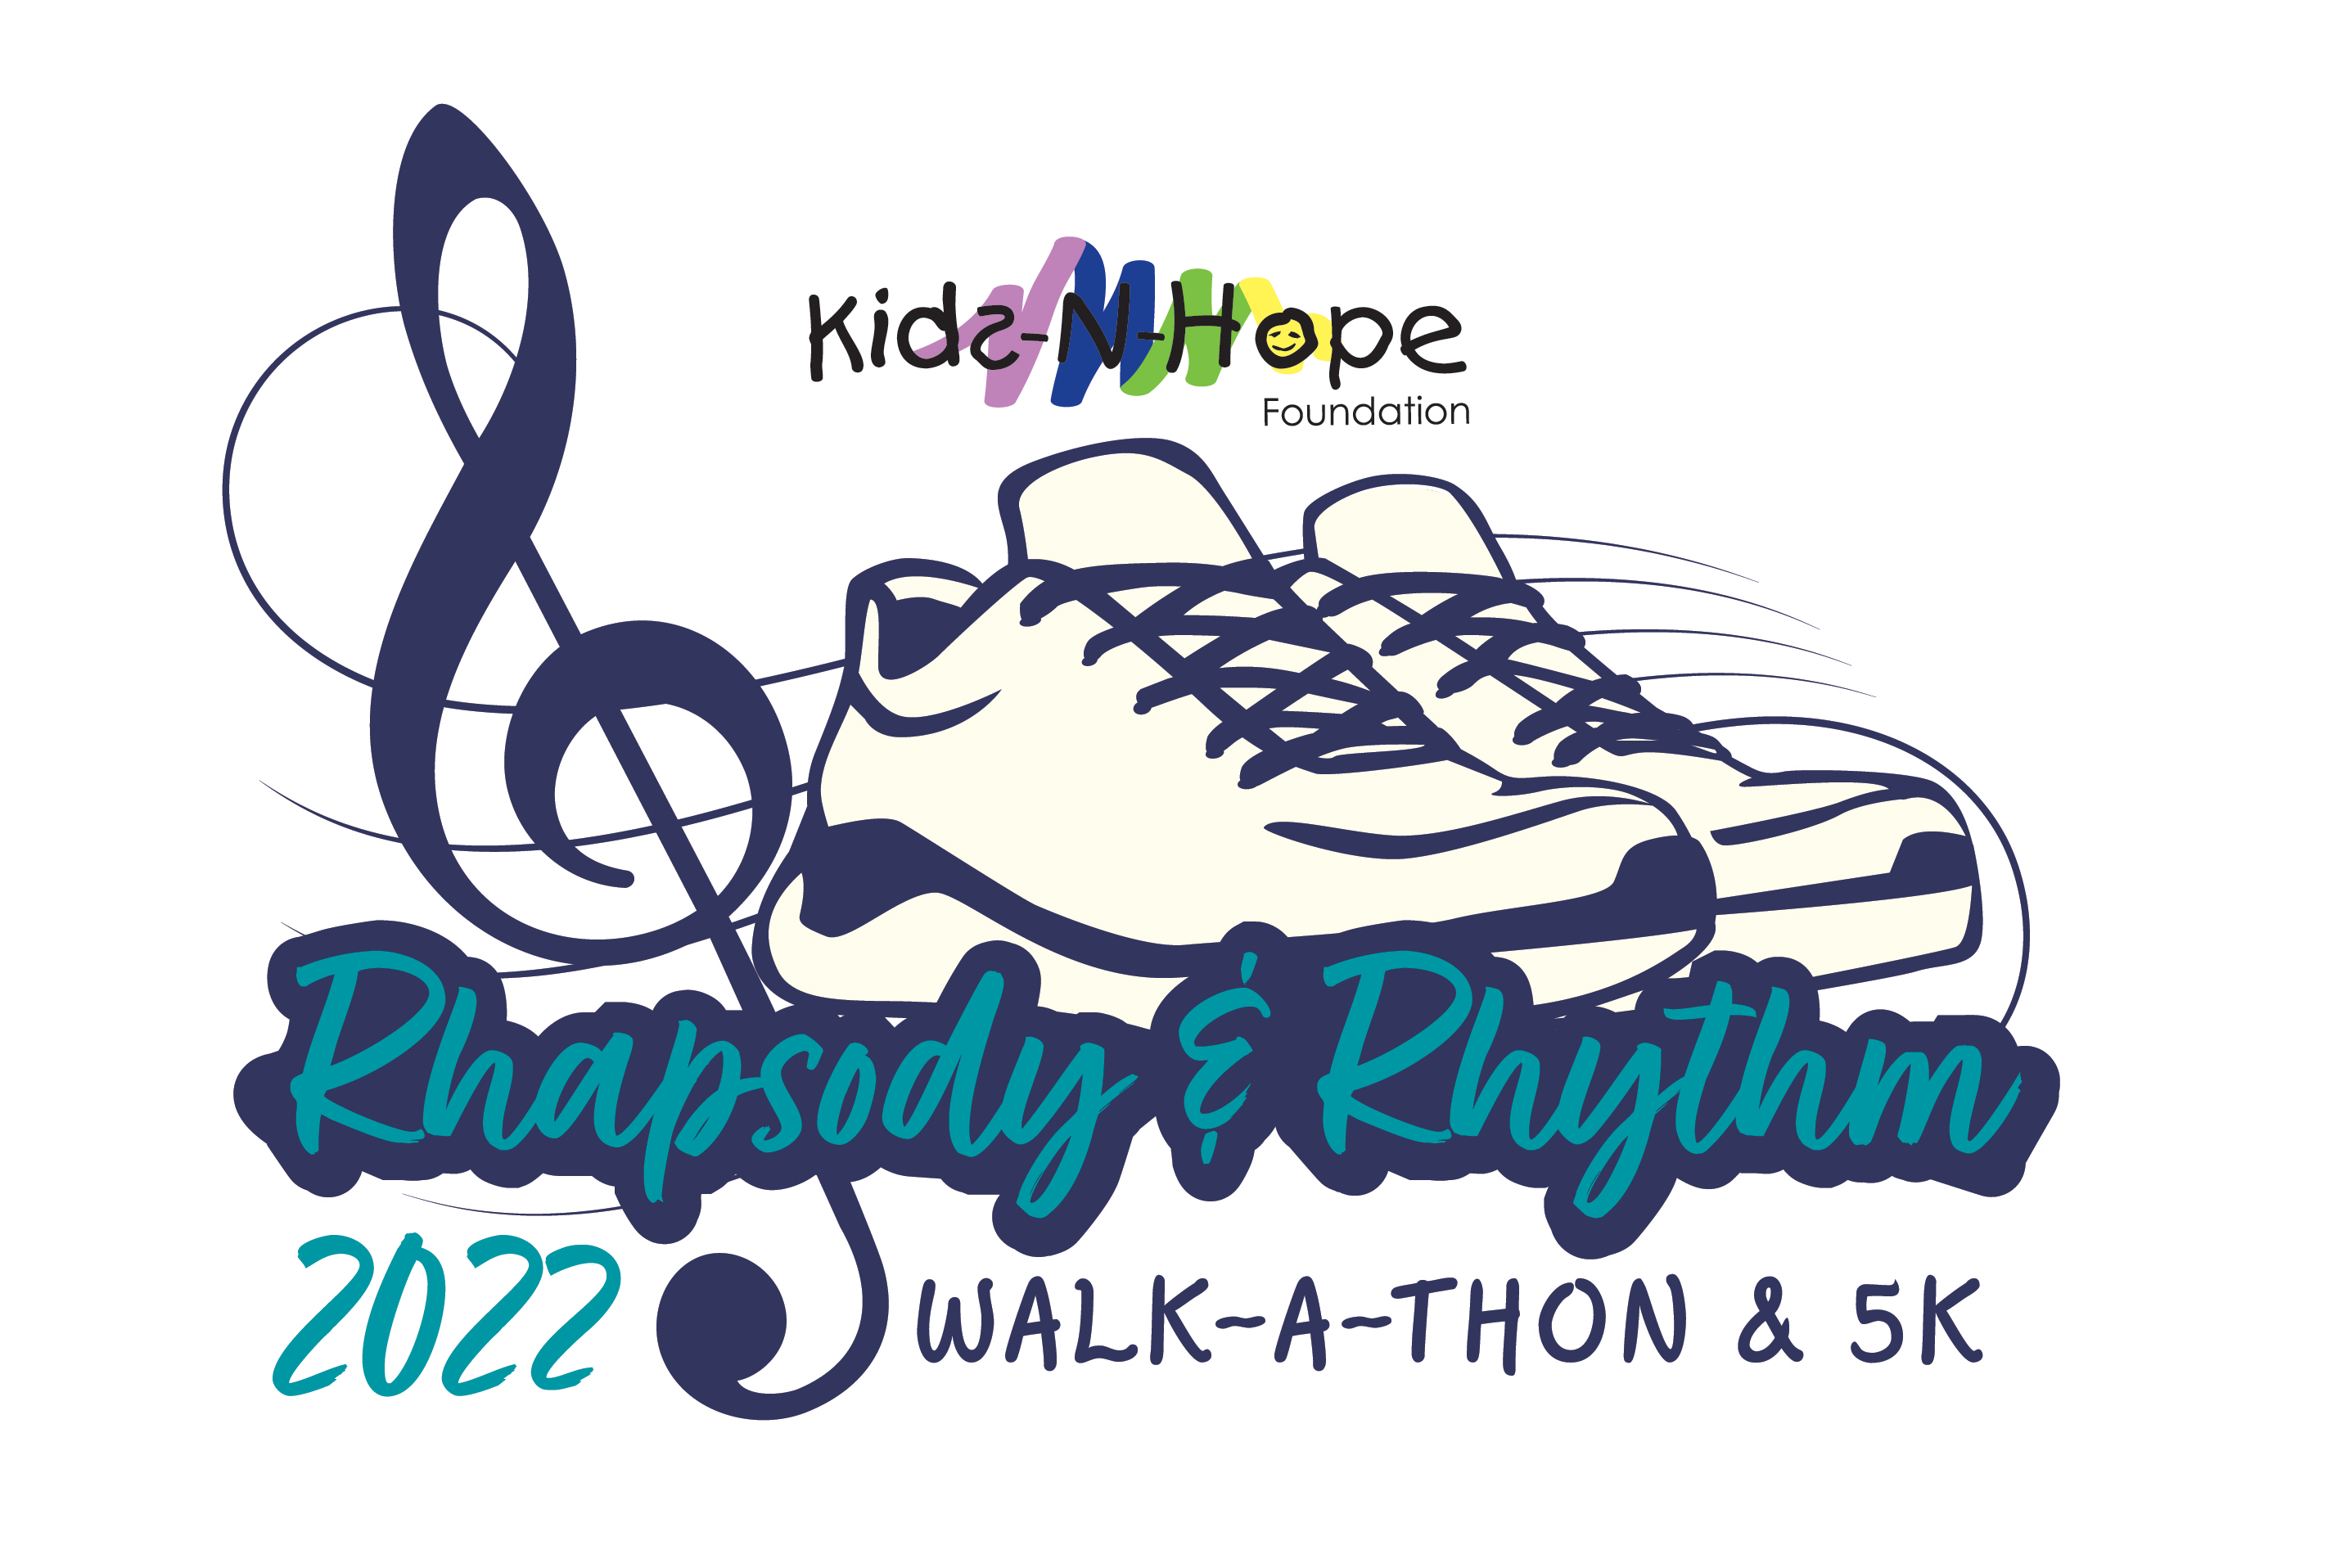 Rhapsody & Rhythm Walk-A-Thon & 5K Logo with Music Note and Sneakers